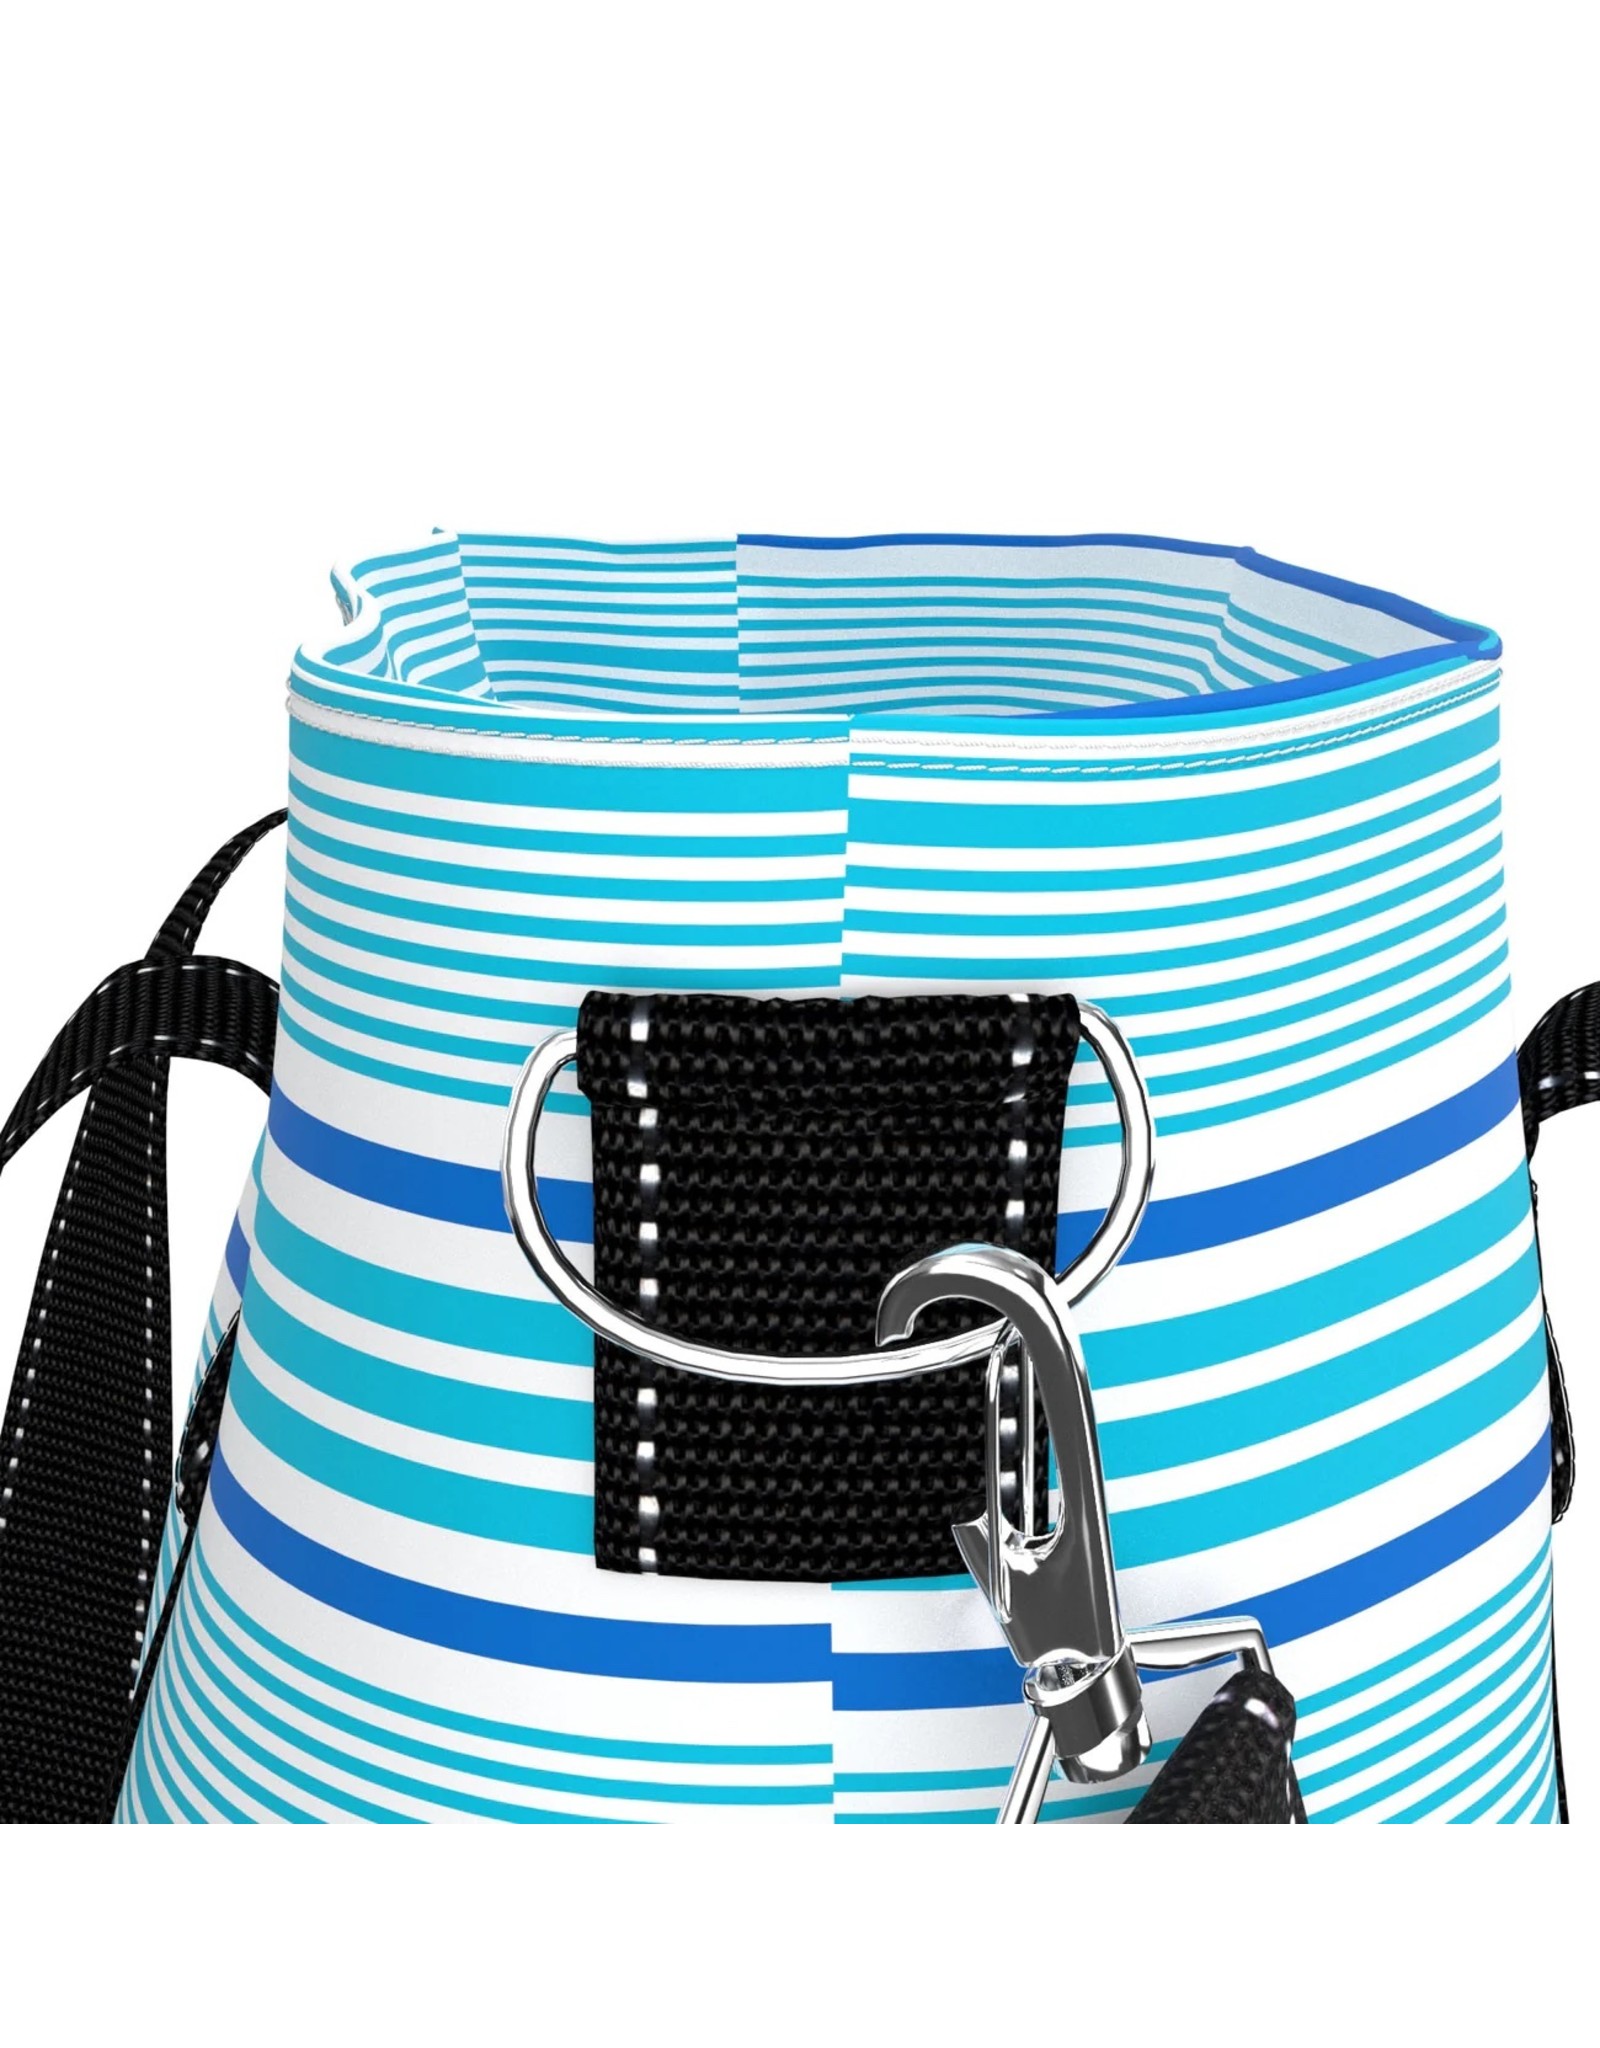 Scout Cools Gold-Seas the Day Soft Cooler